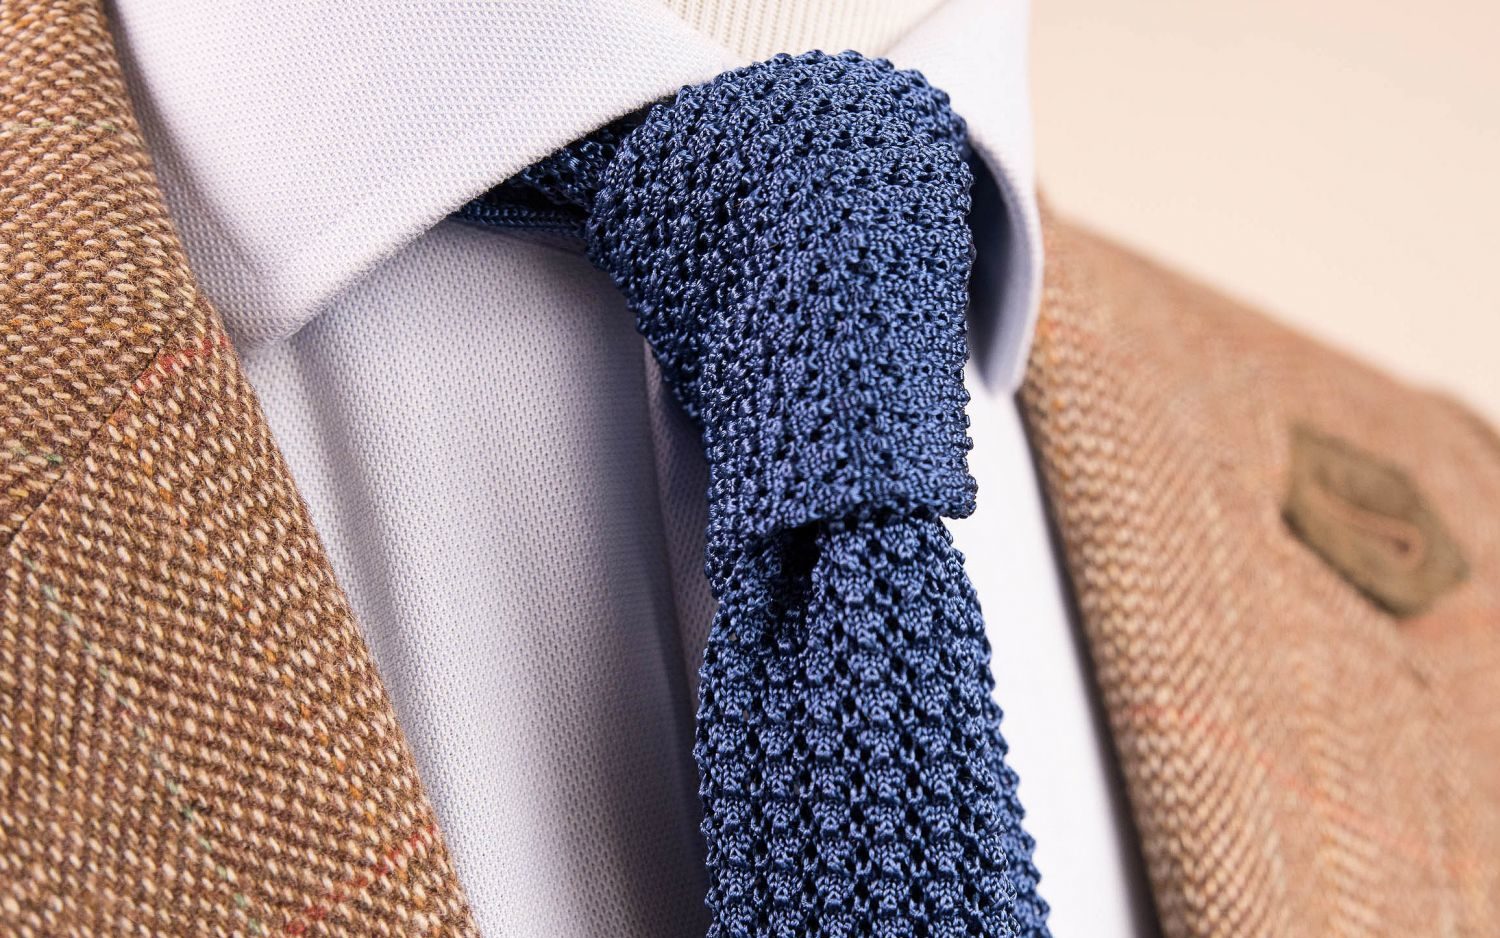 Blue knit tie worn by a wooden dummy with a white shirt and beige tweed jacket